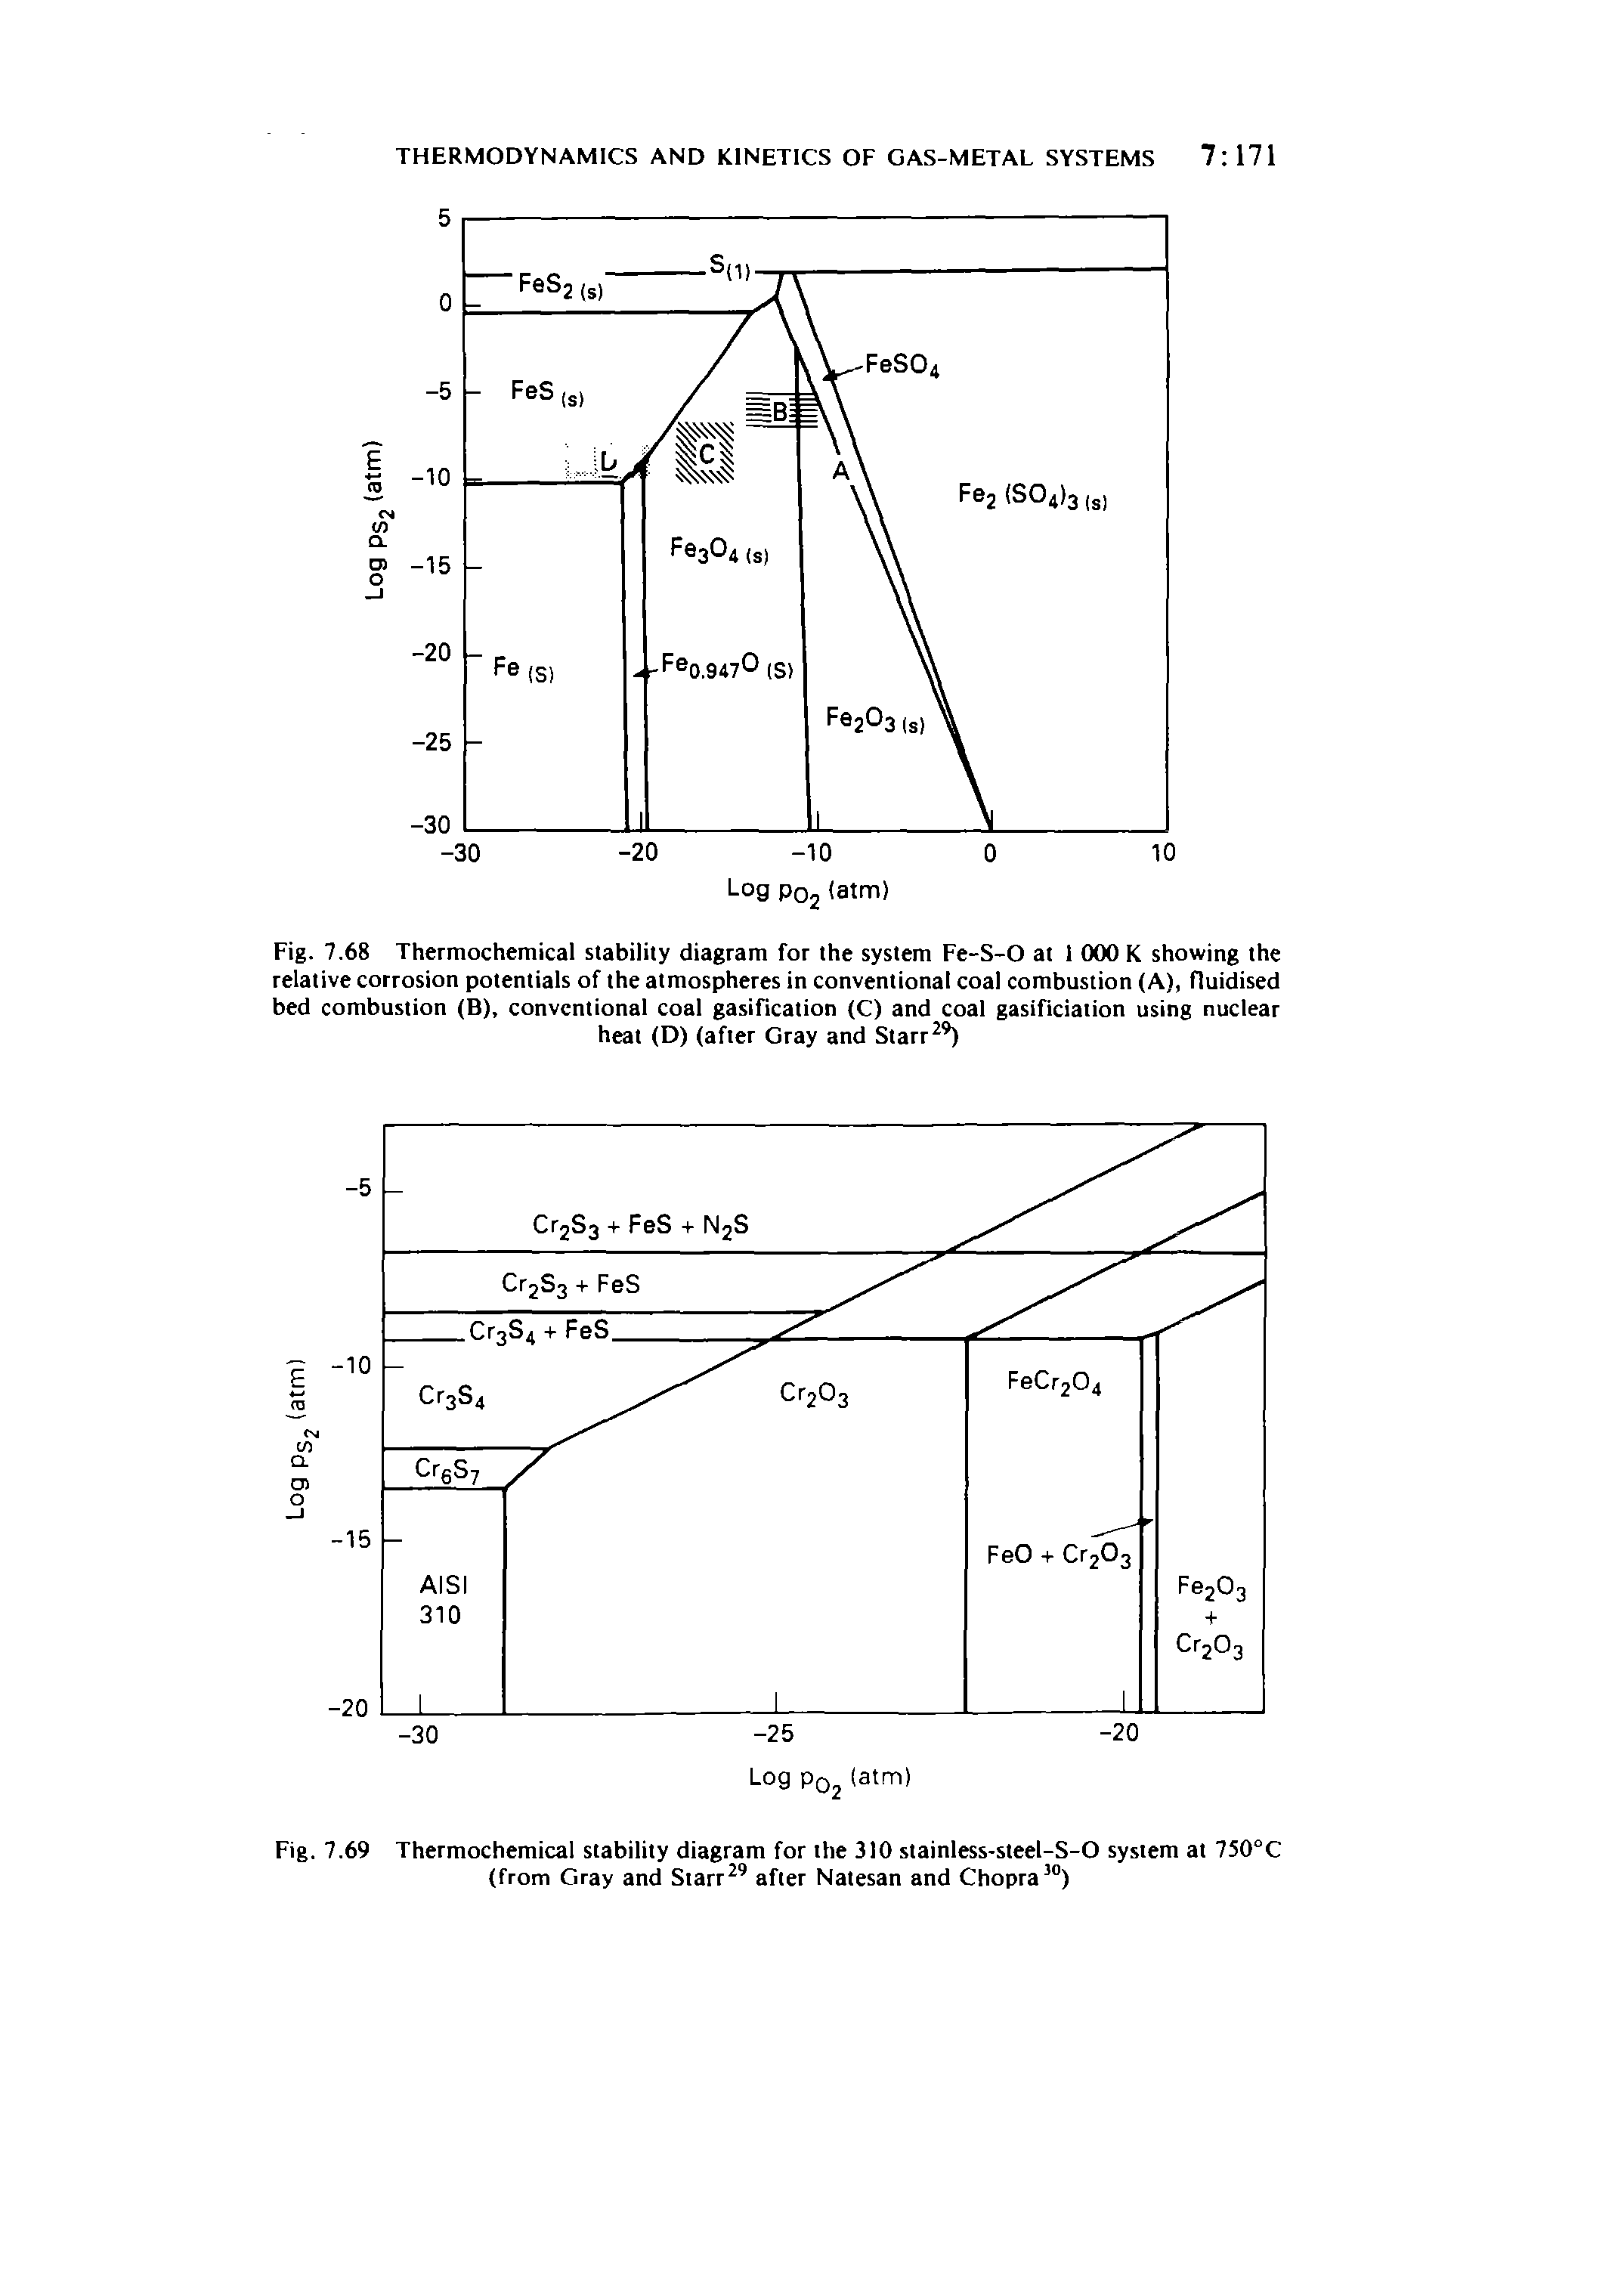 Fig. 7.69 Thermochemical stability diagram for the 310 stainless-steel-S-O system at 750°C (from Gray and Starr after Natesan and Chopra ")...